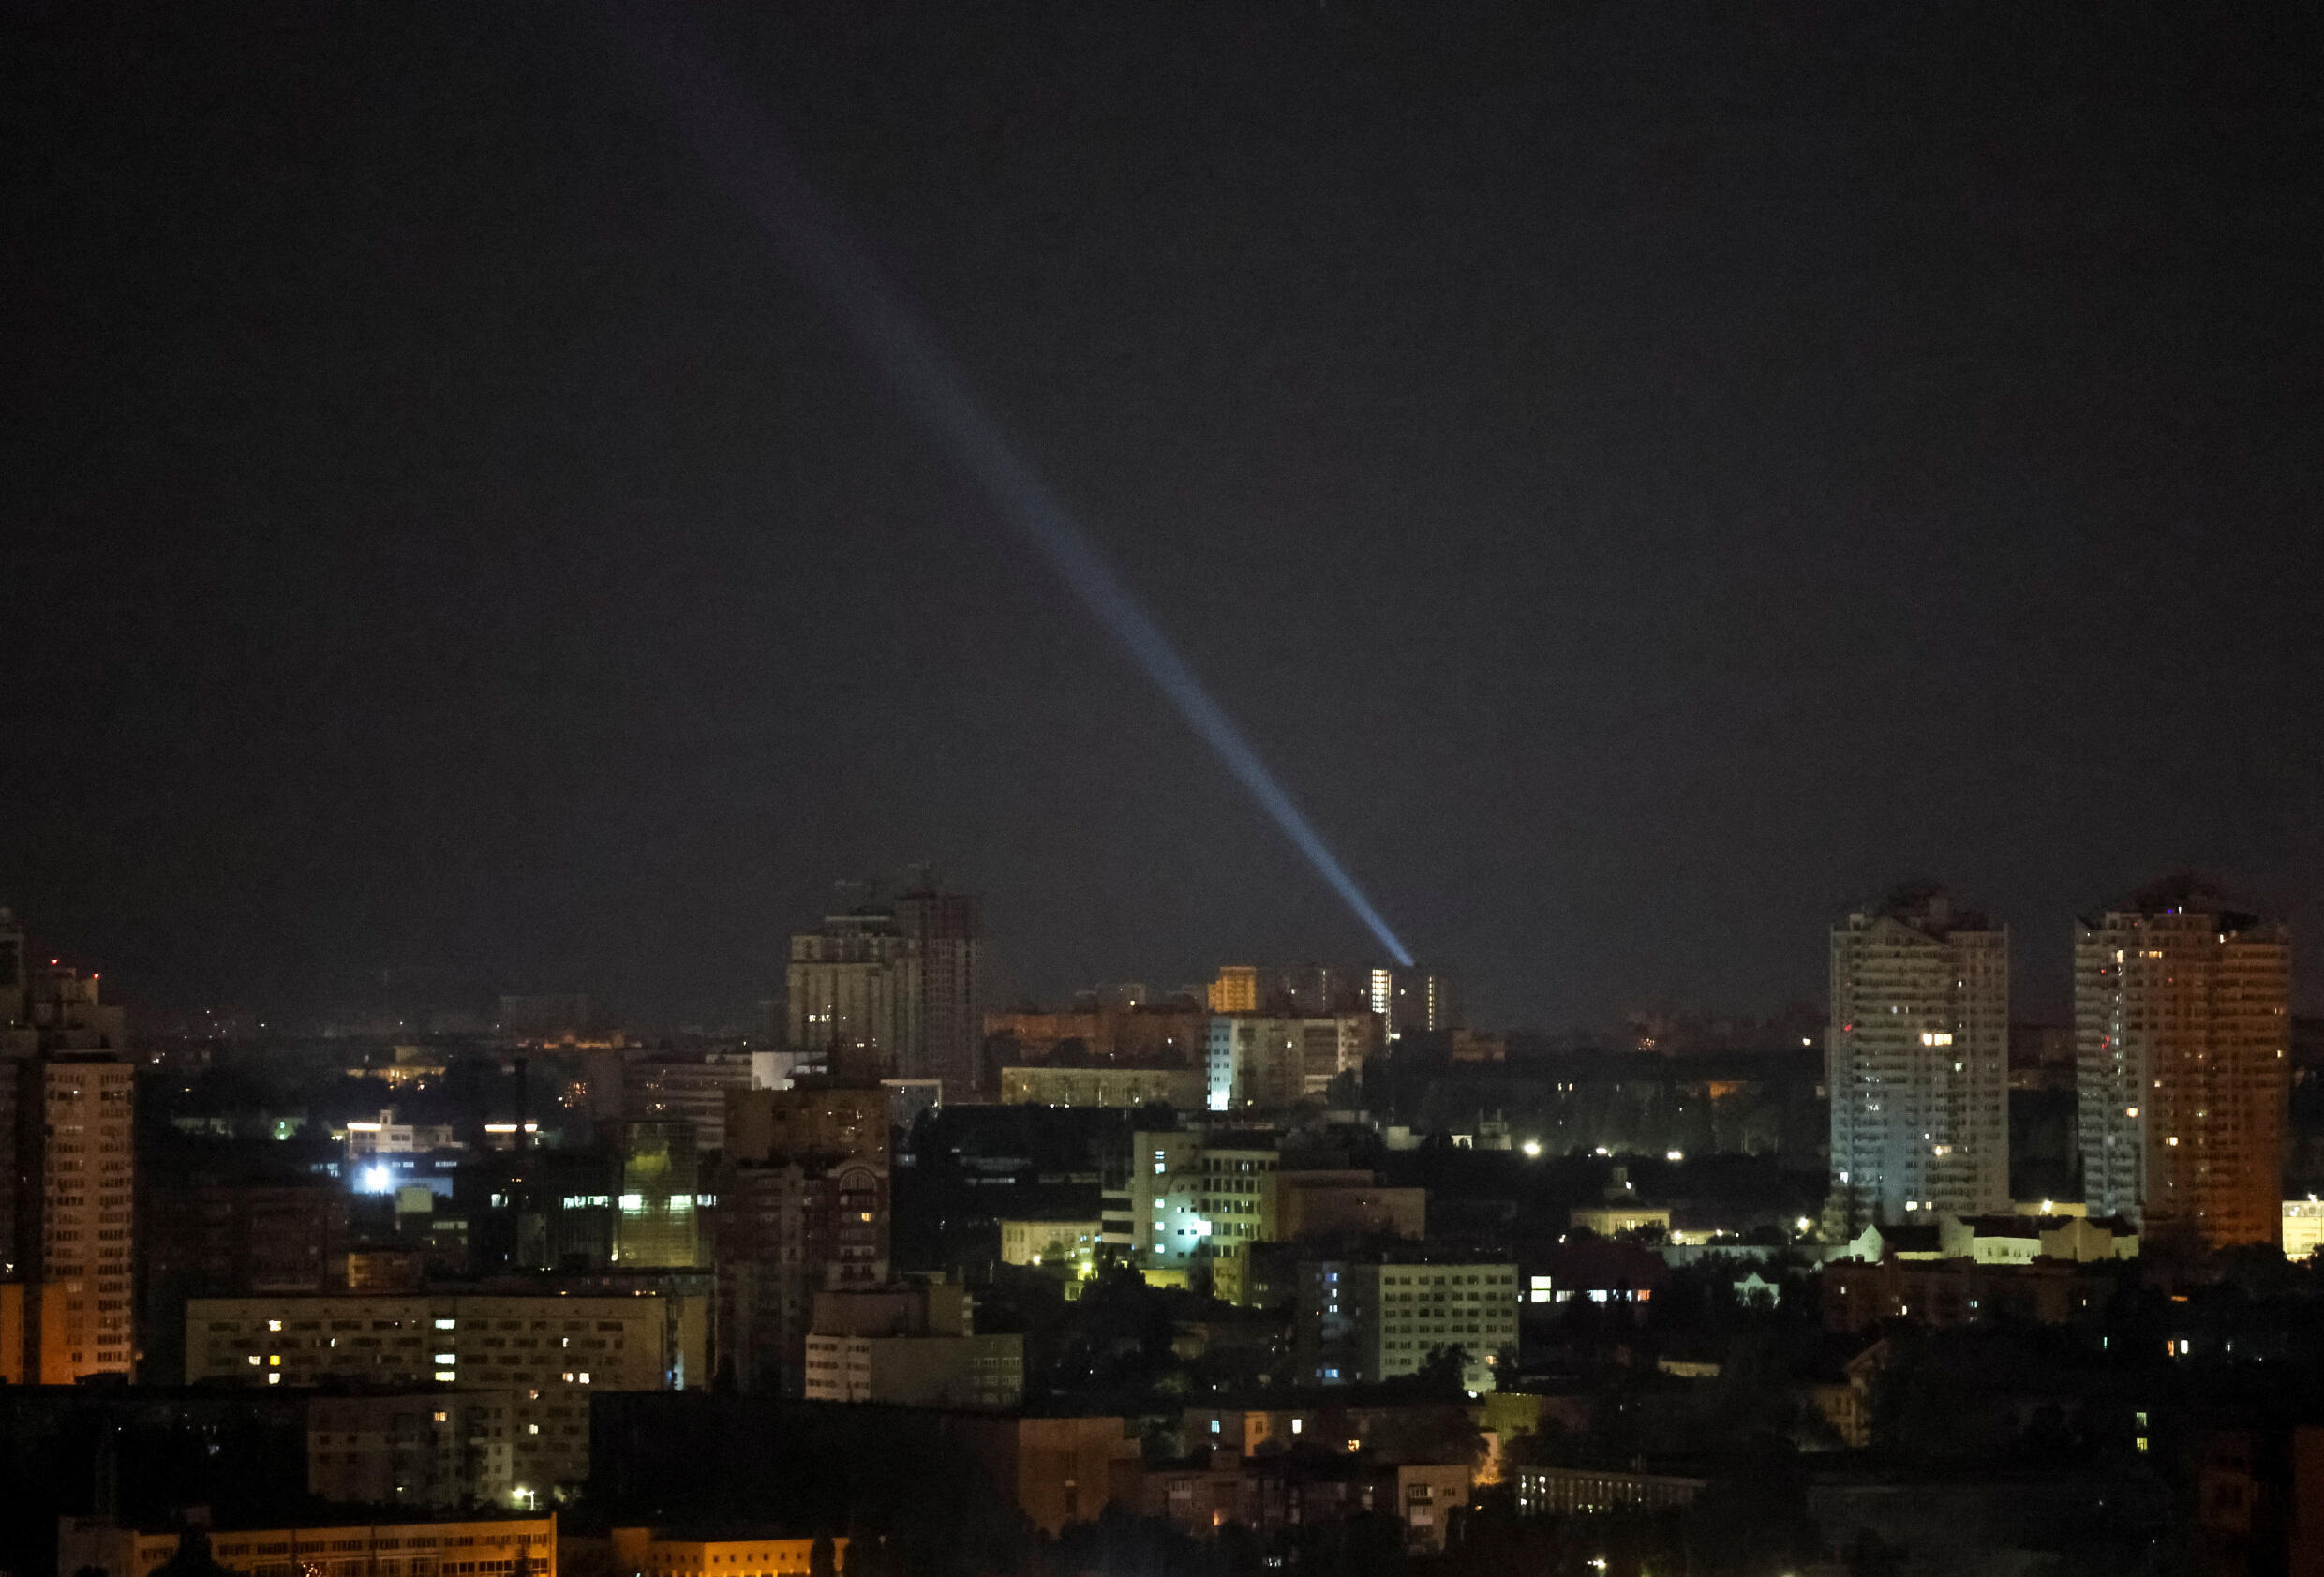 Ukrainian military wear a searchlight as they search for drones in the sky over the city during a Russian-launched drone attack on kyiv, Ukraine, on July 25, 2023.